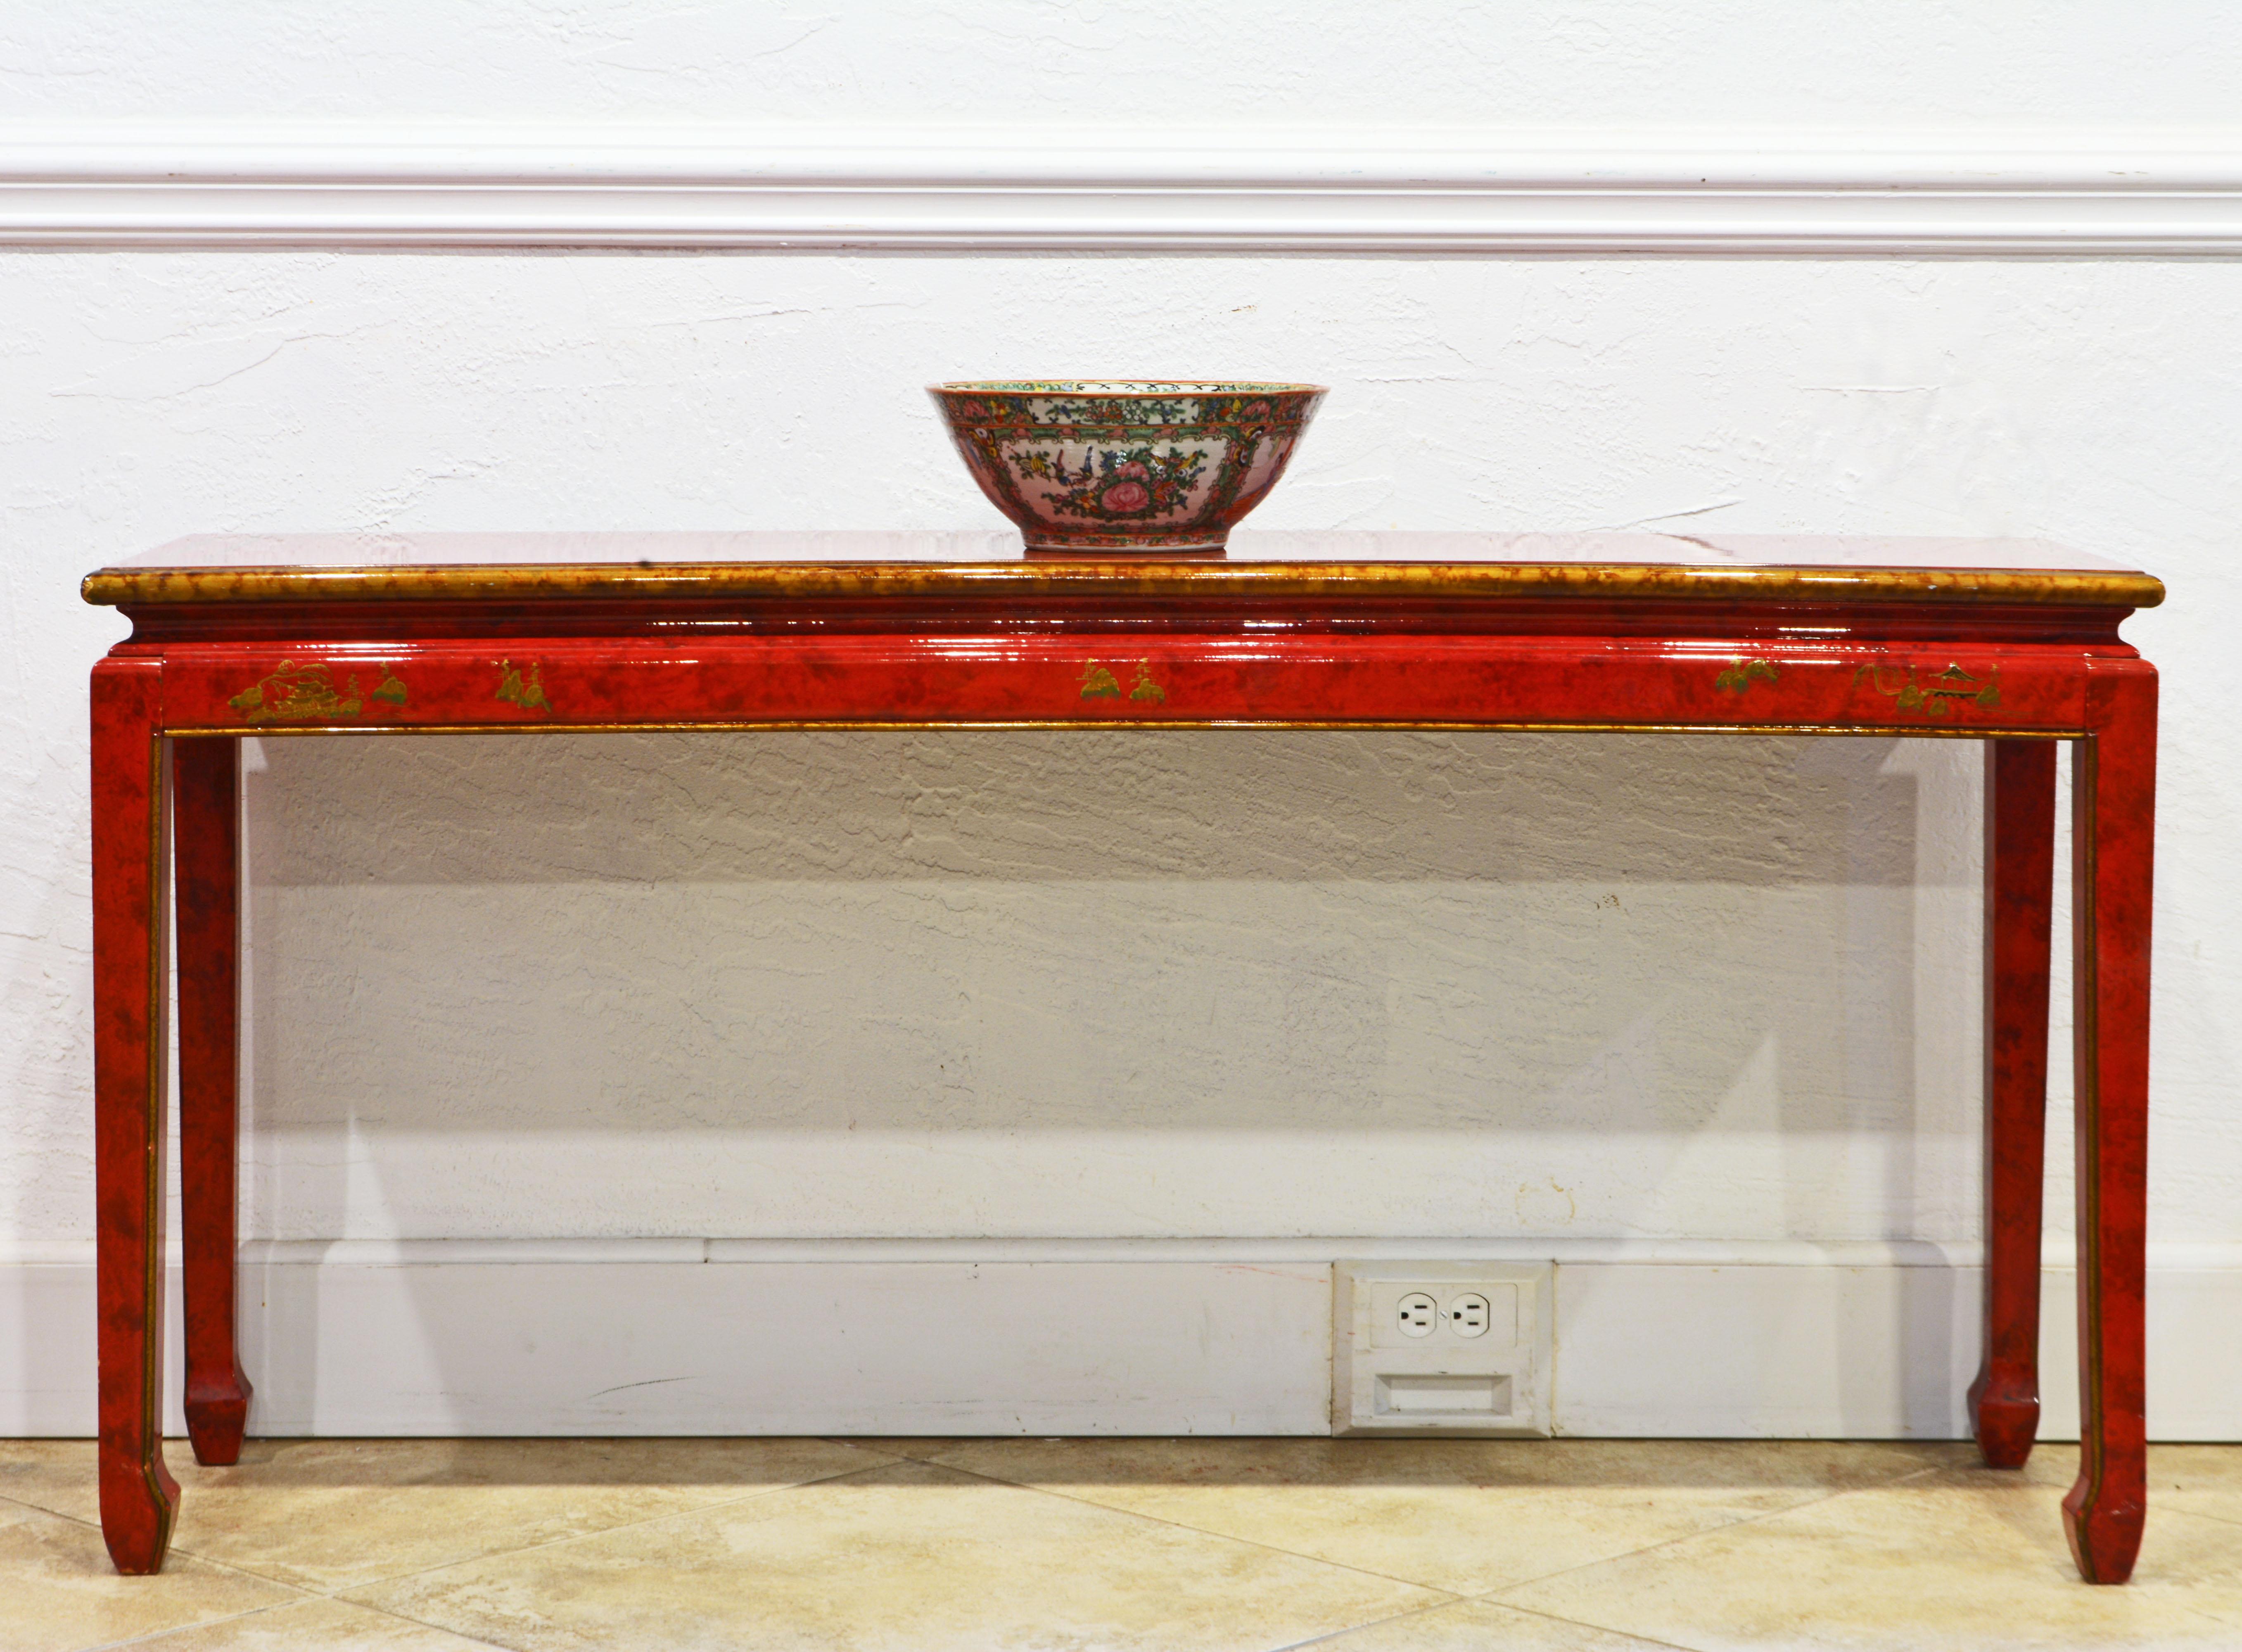 This elegant mid century lacquered chinoiserie Ming style console table features a waisted top decorated with gold finish bands and edge above the frame with chinoiserie gilt motifs and four Ming style legs accented by gold finished edges. The table